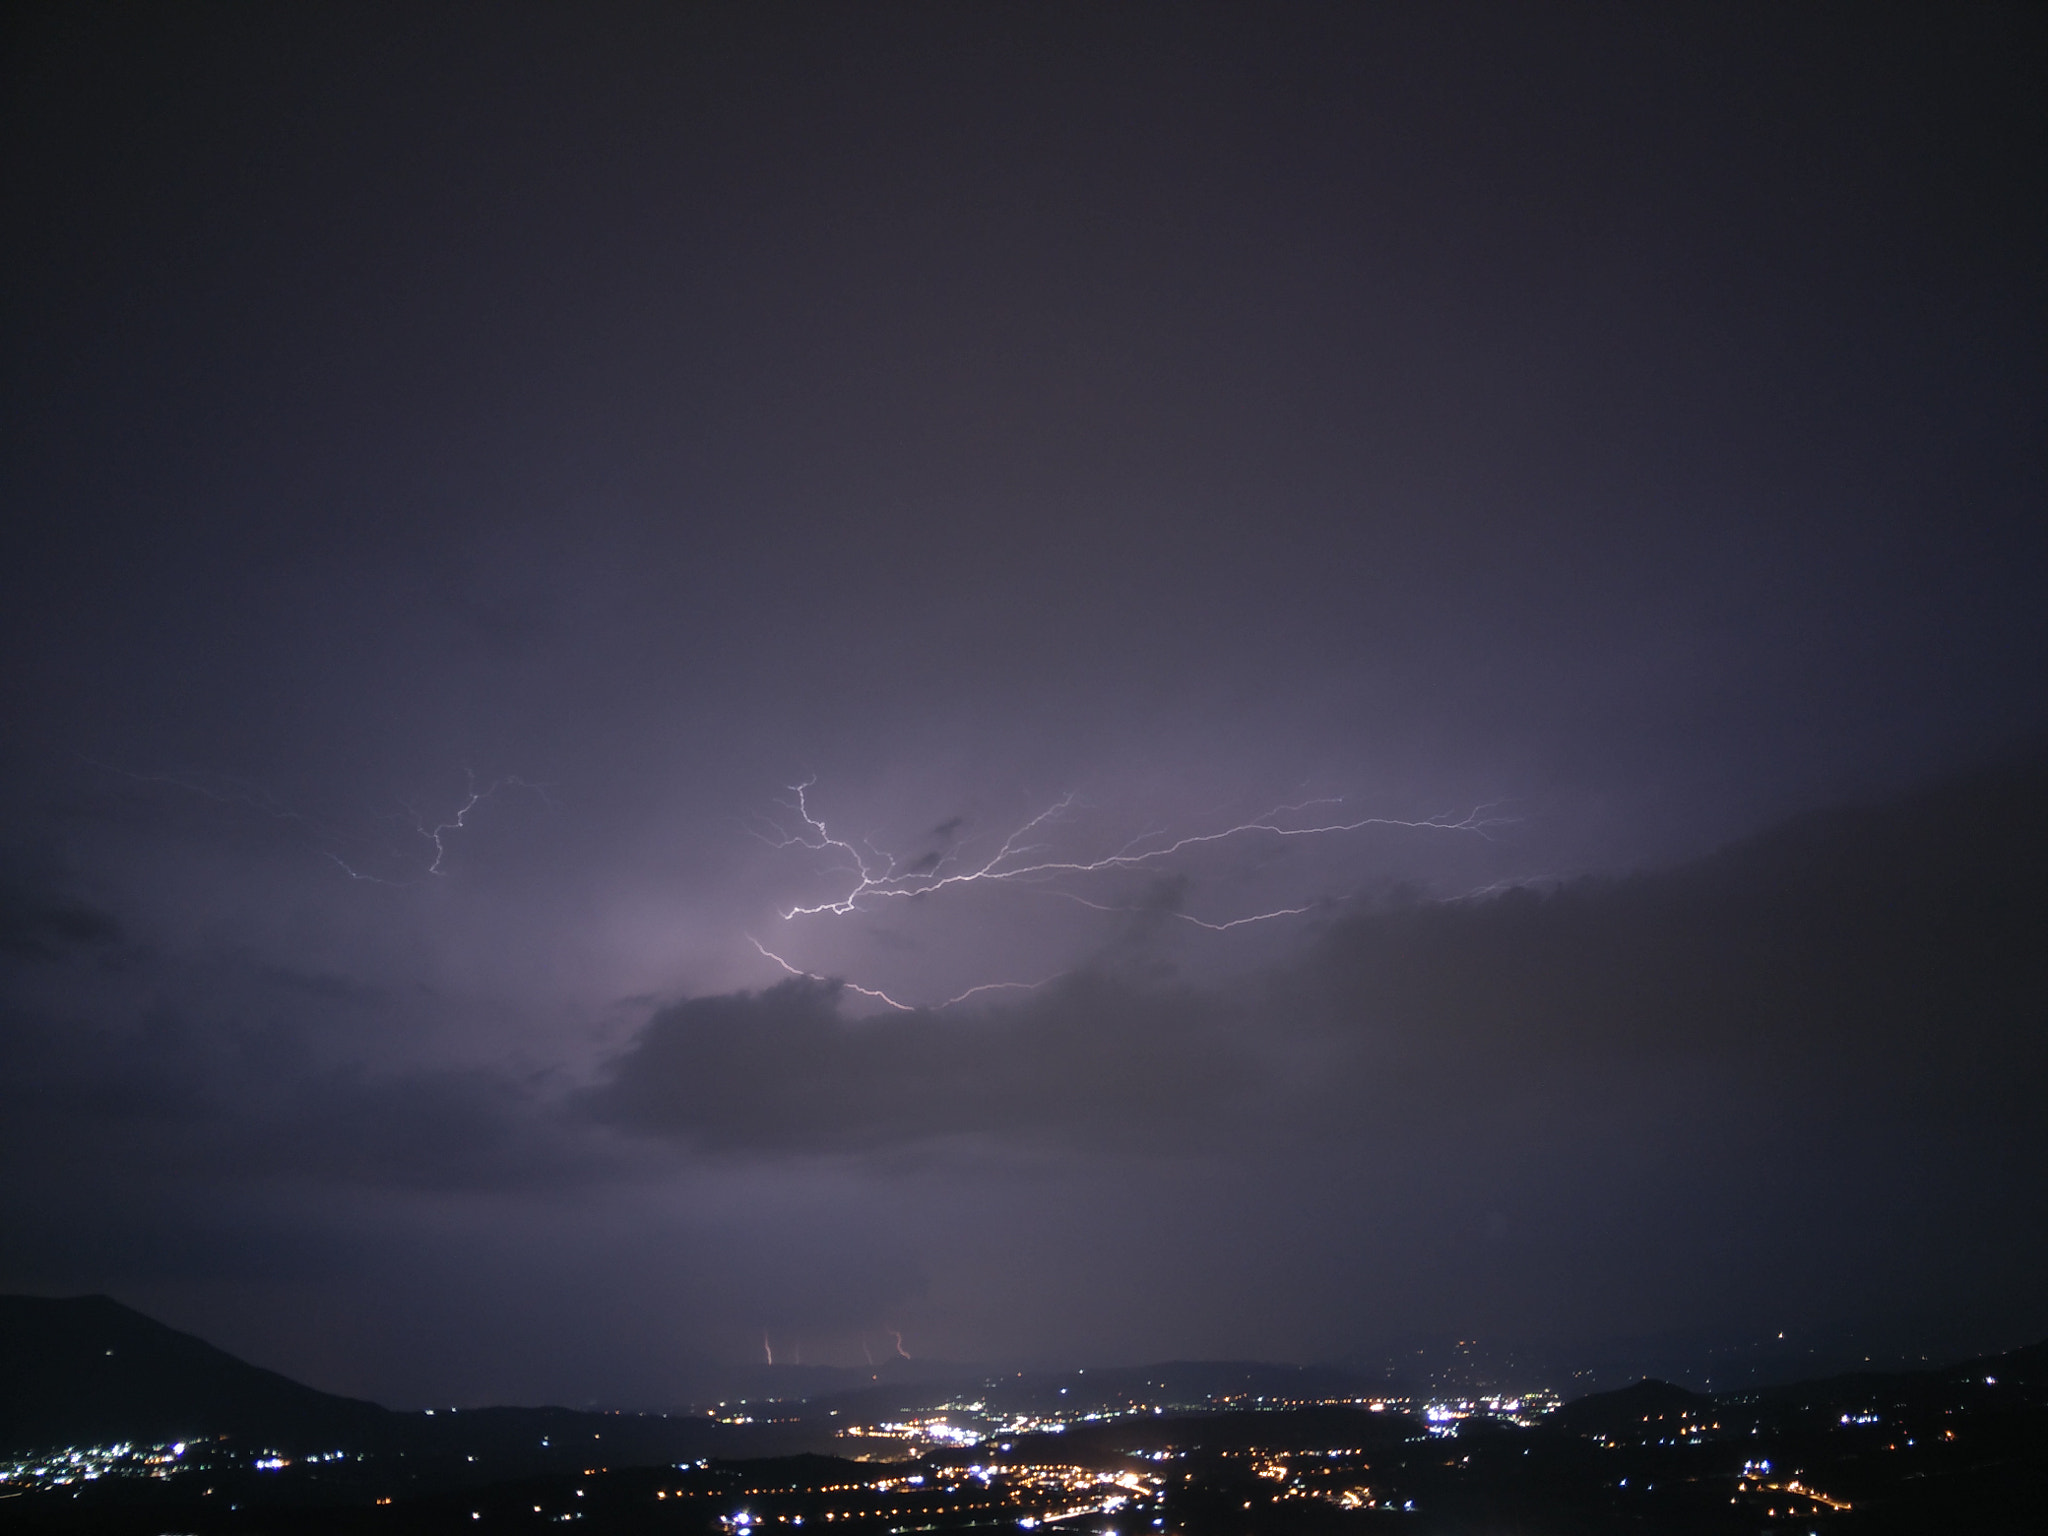 OPPO Find7 sample photo. Night thunderstorm photography